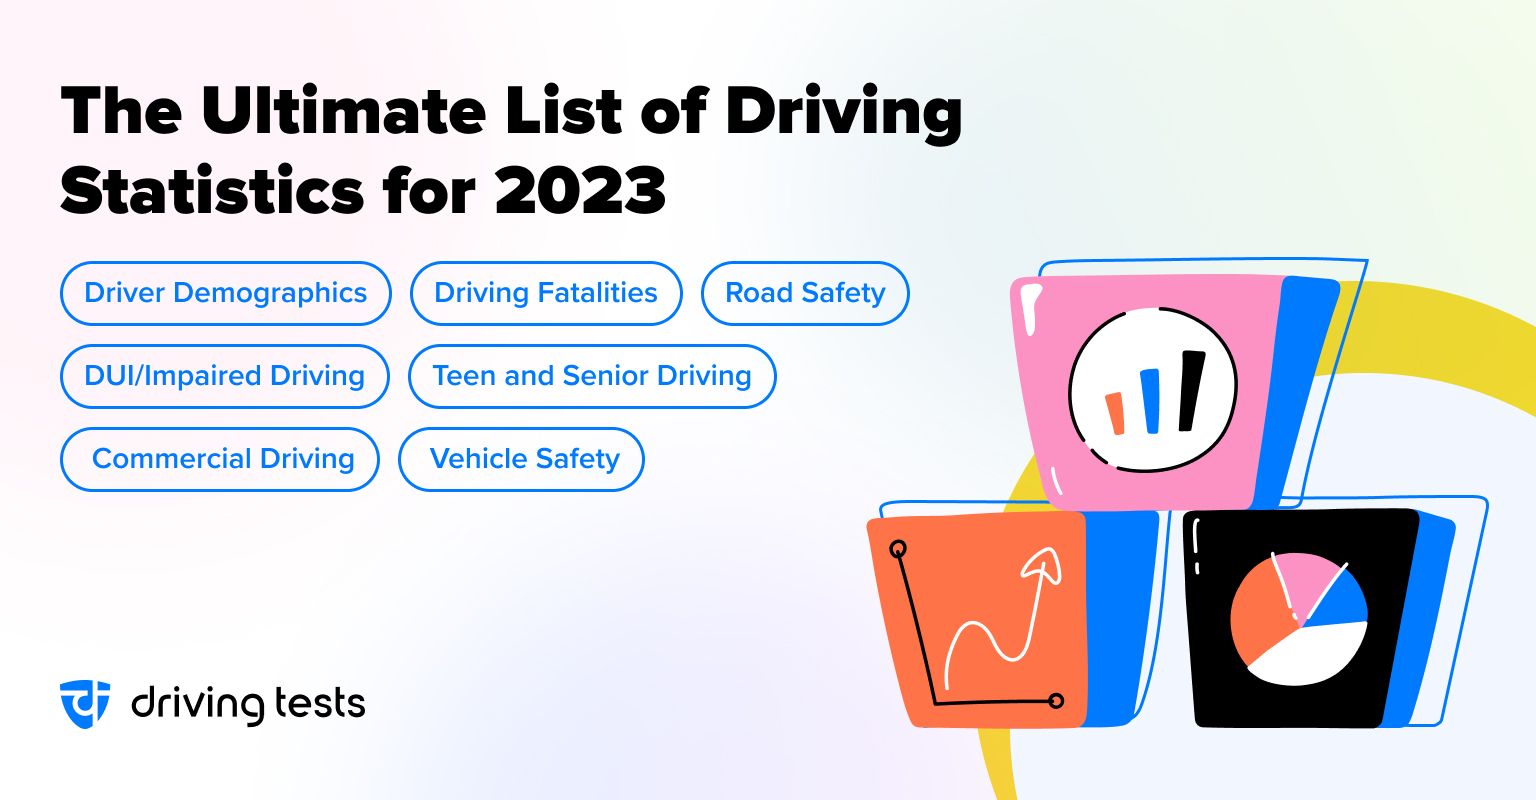 Teen Driving Facts and Statistics 2023